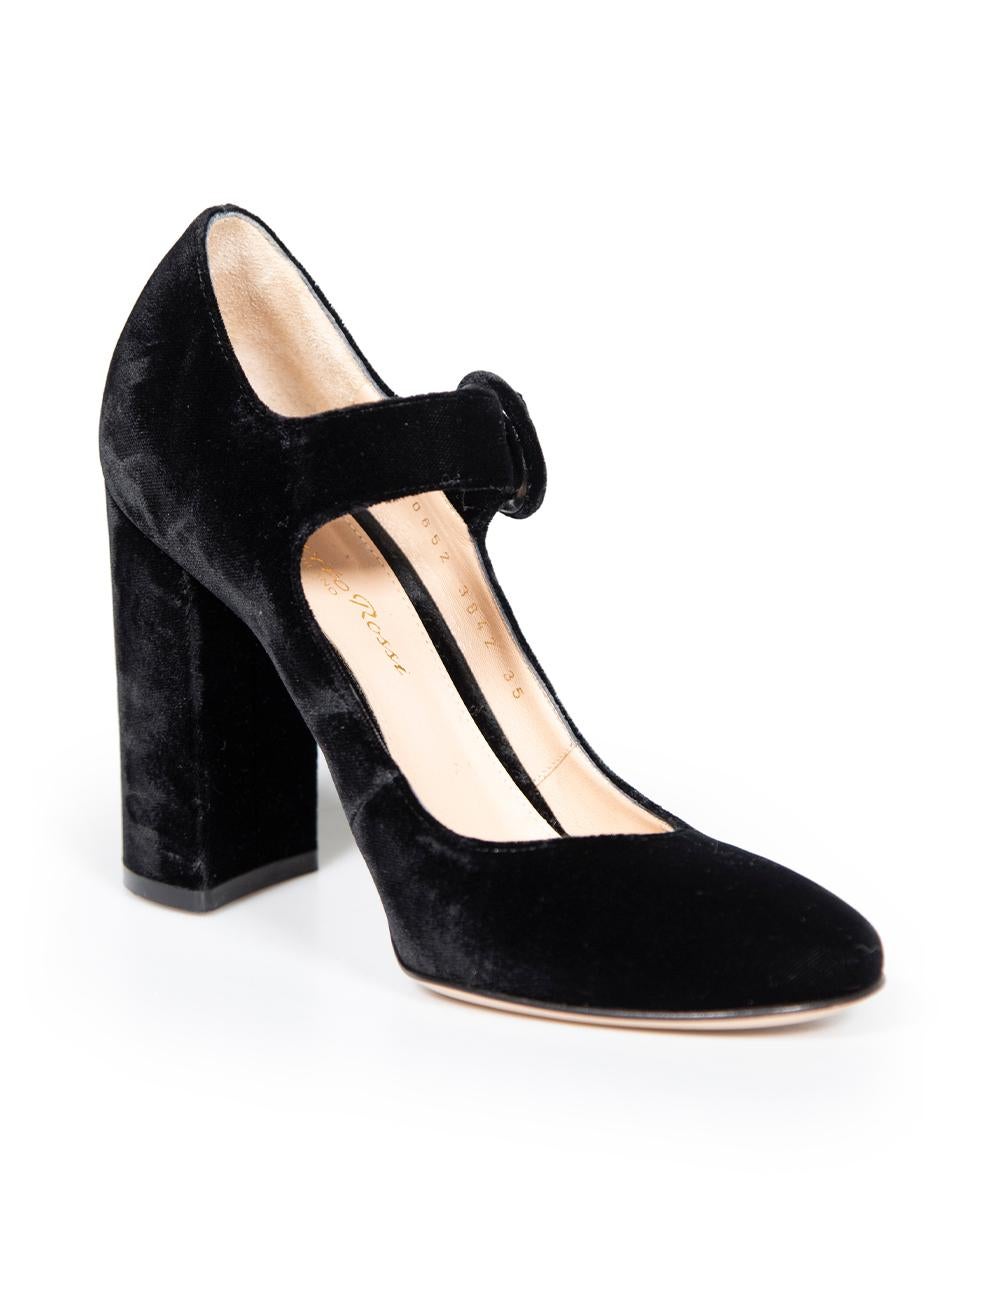 CONDITION is Very good. Hardly any visible wear to dress is evident on this used Gianvito Rossi designer resale item. These shoes come with original dust bag.
 
 
 
 Details
 
 
 Model: Adelle
 
 Black
 
 Velvet
 
 Heels
 
 Round toe
 
 Adjustable